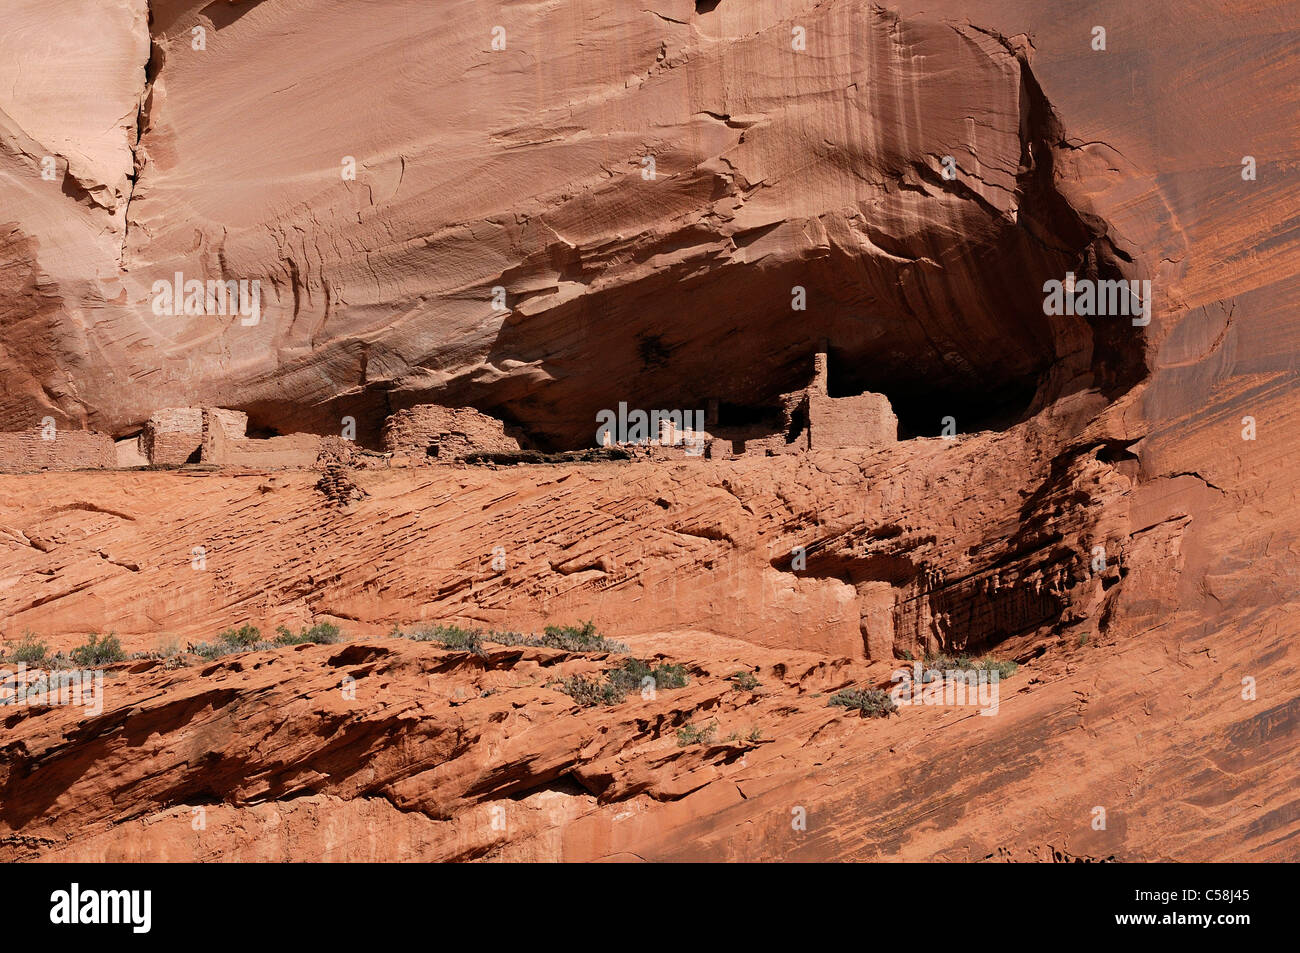 Les Indiens Anasazi, ruines, North Canyon, Canyon del Muerto, Canyon de Chelly, National Monument, Arizona, USA, United States, Americ Banque D'Images